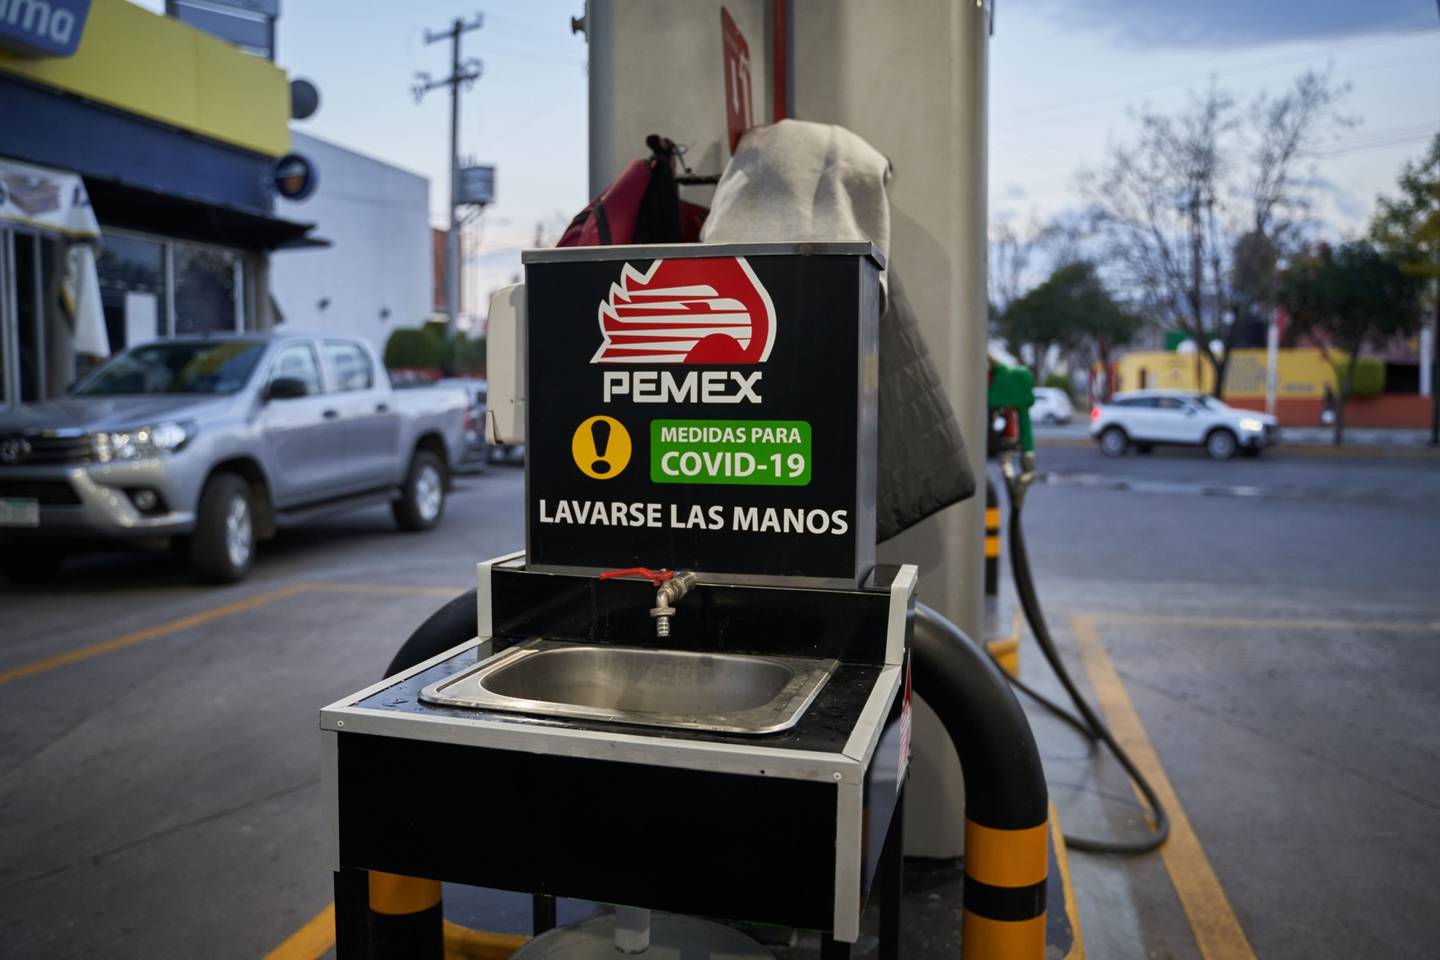 Operational inefficiencies have caused Pemex to lose billions in the third quarter, even as surging oil prices helped international rivals to amass record profits.